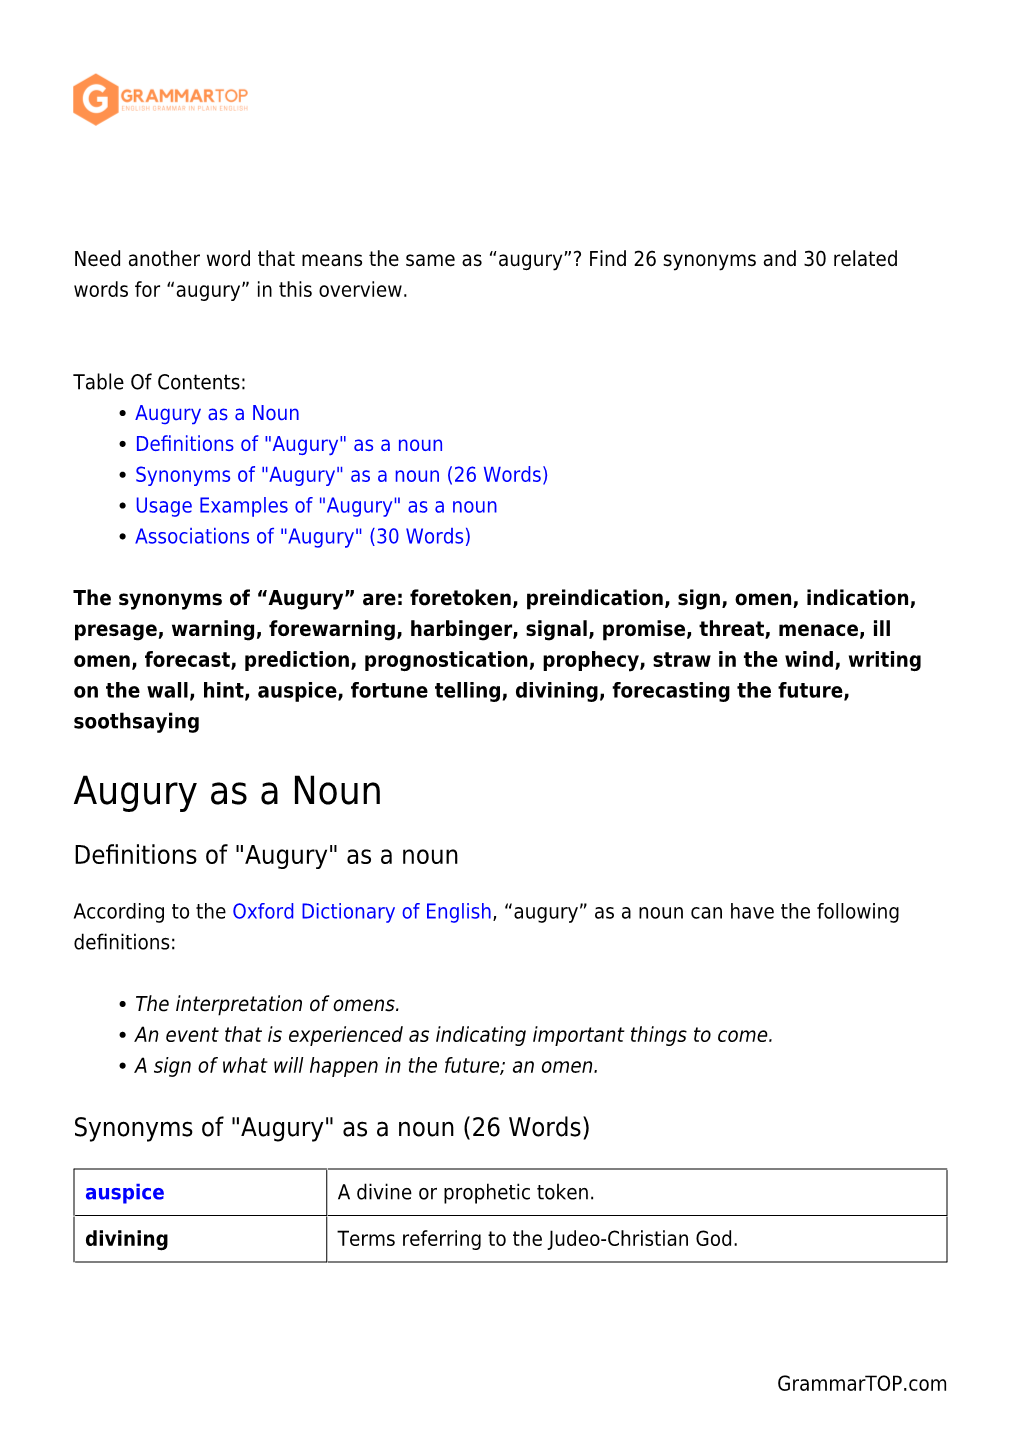 Augury”? Find 26 Synonyms and 30 Related Words for “Augury” in This Overview